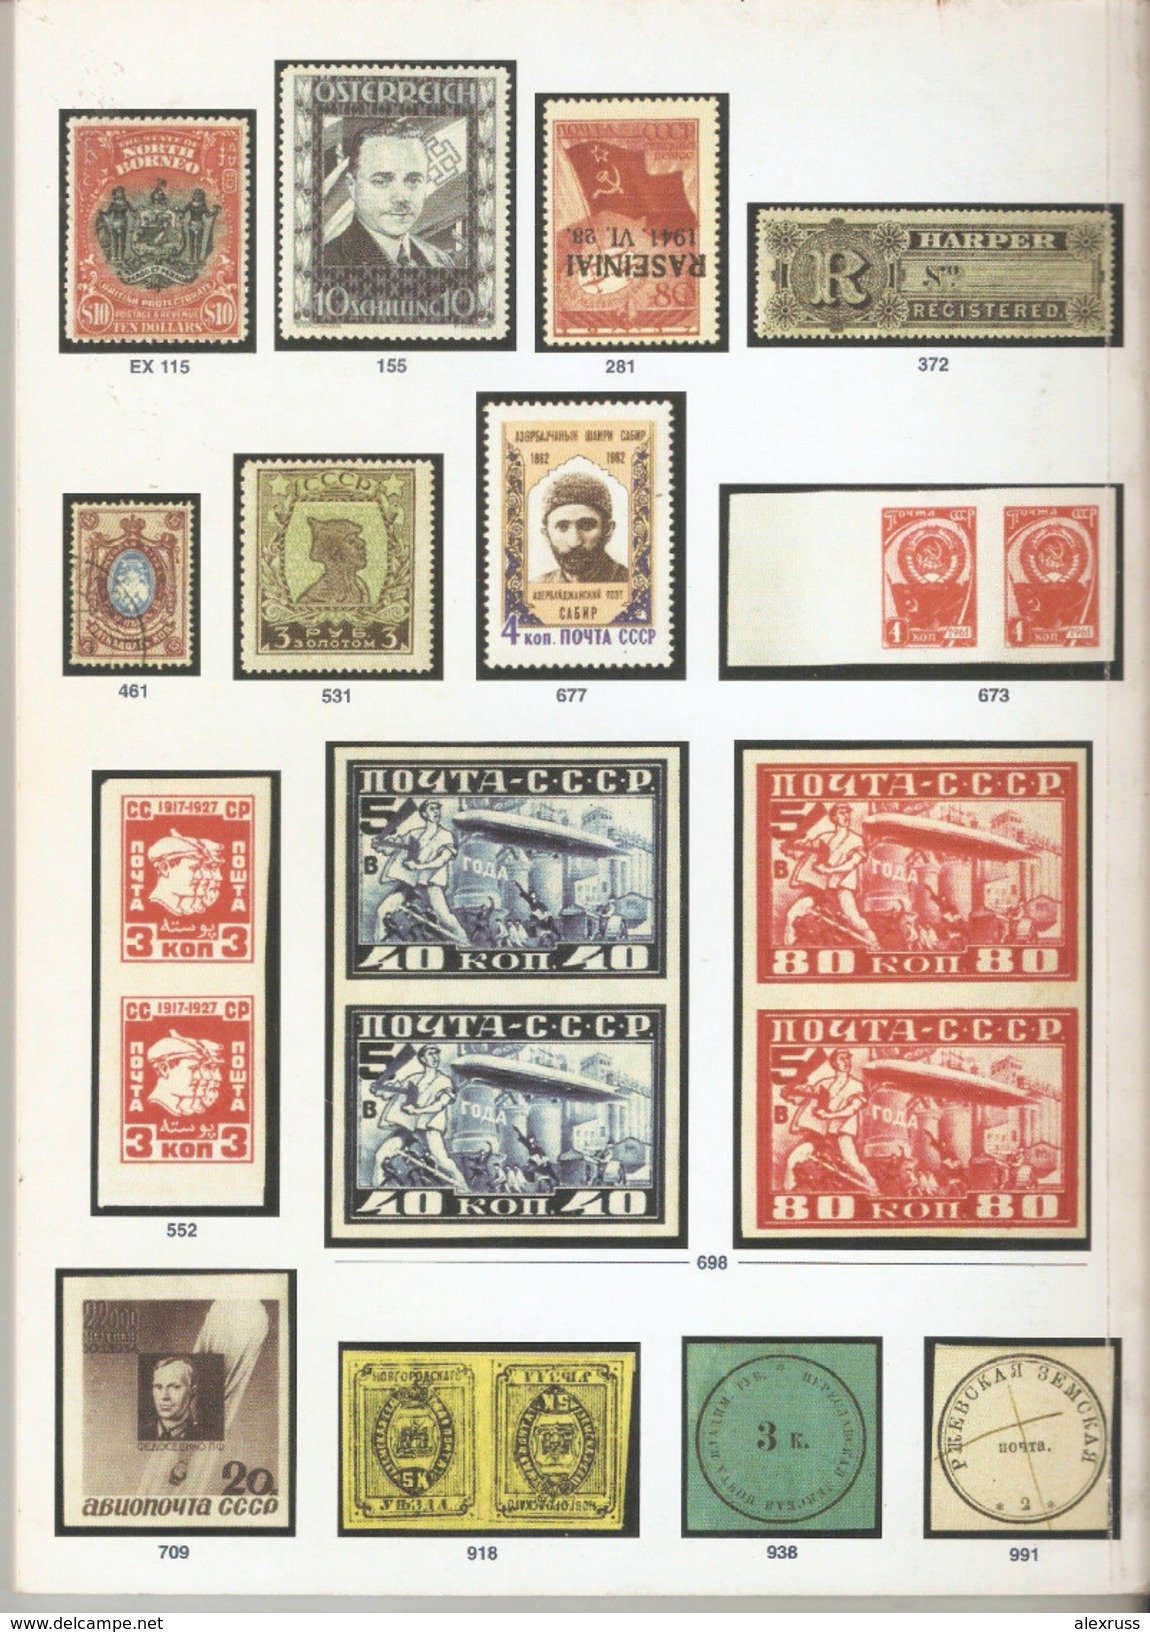 Raritan Stamps Auction 37,Dec 2008 Catalog Of Rare Russia Stamps,Errors & Worldwide Rarities - Catalogues For Auction Houses